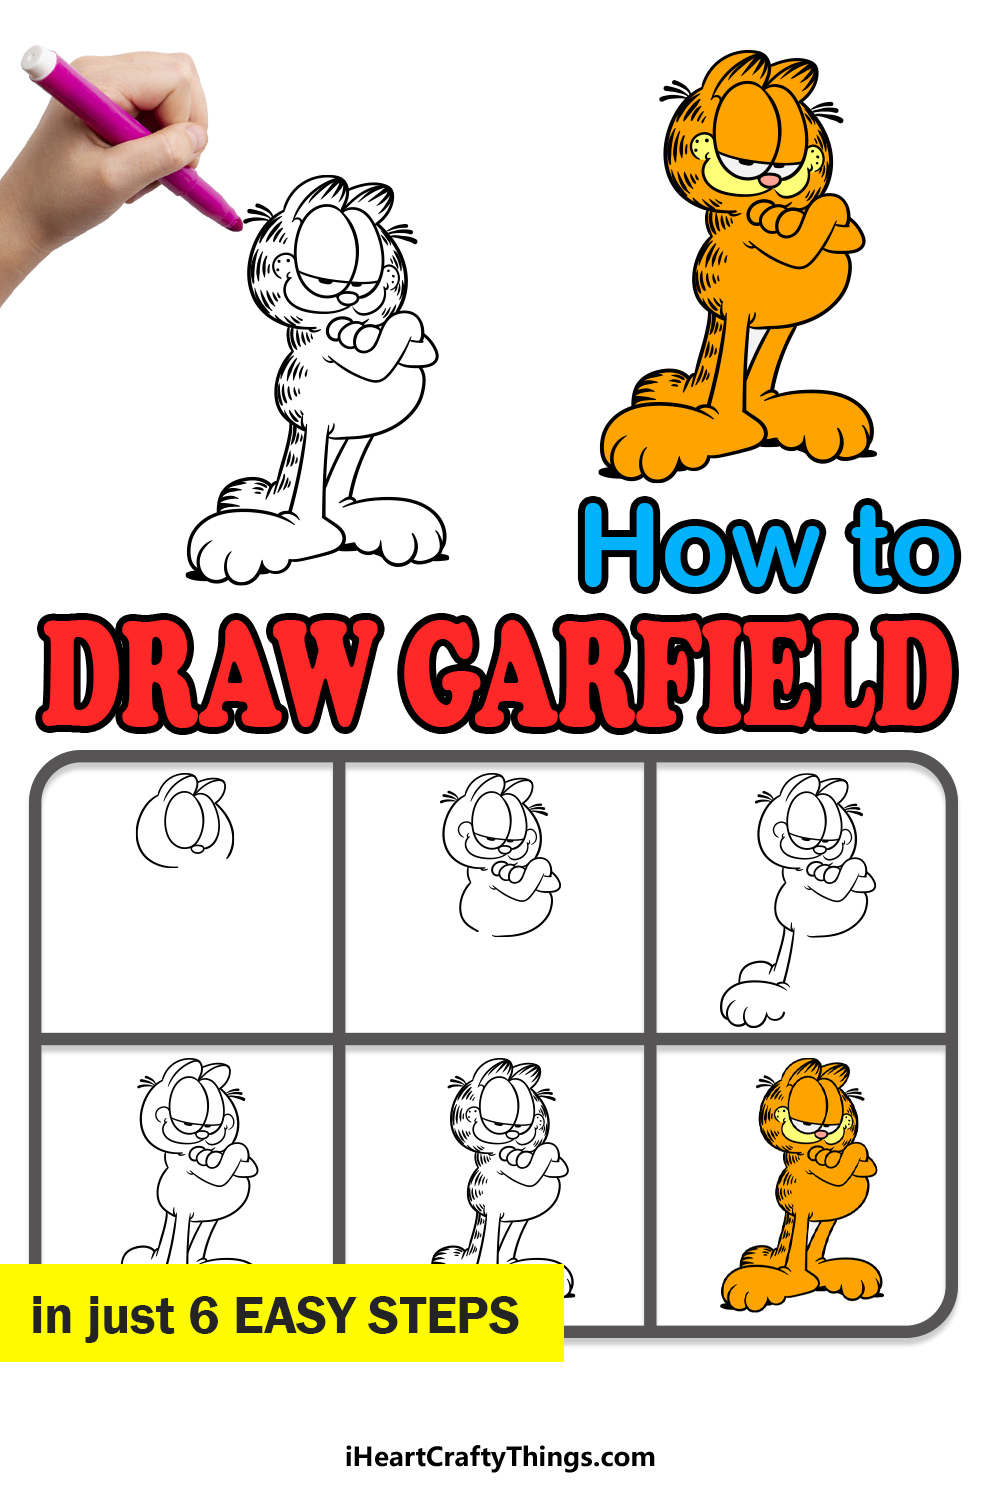 how to draw Garfield in 6 easy steps